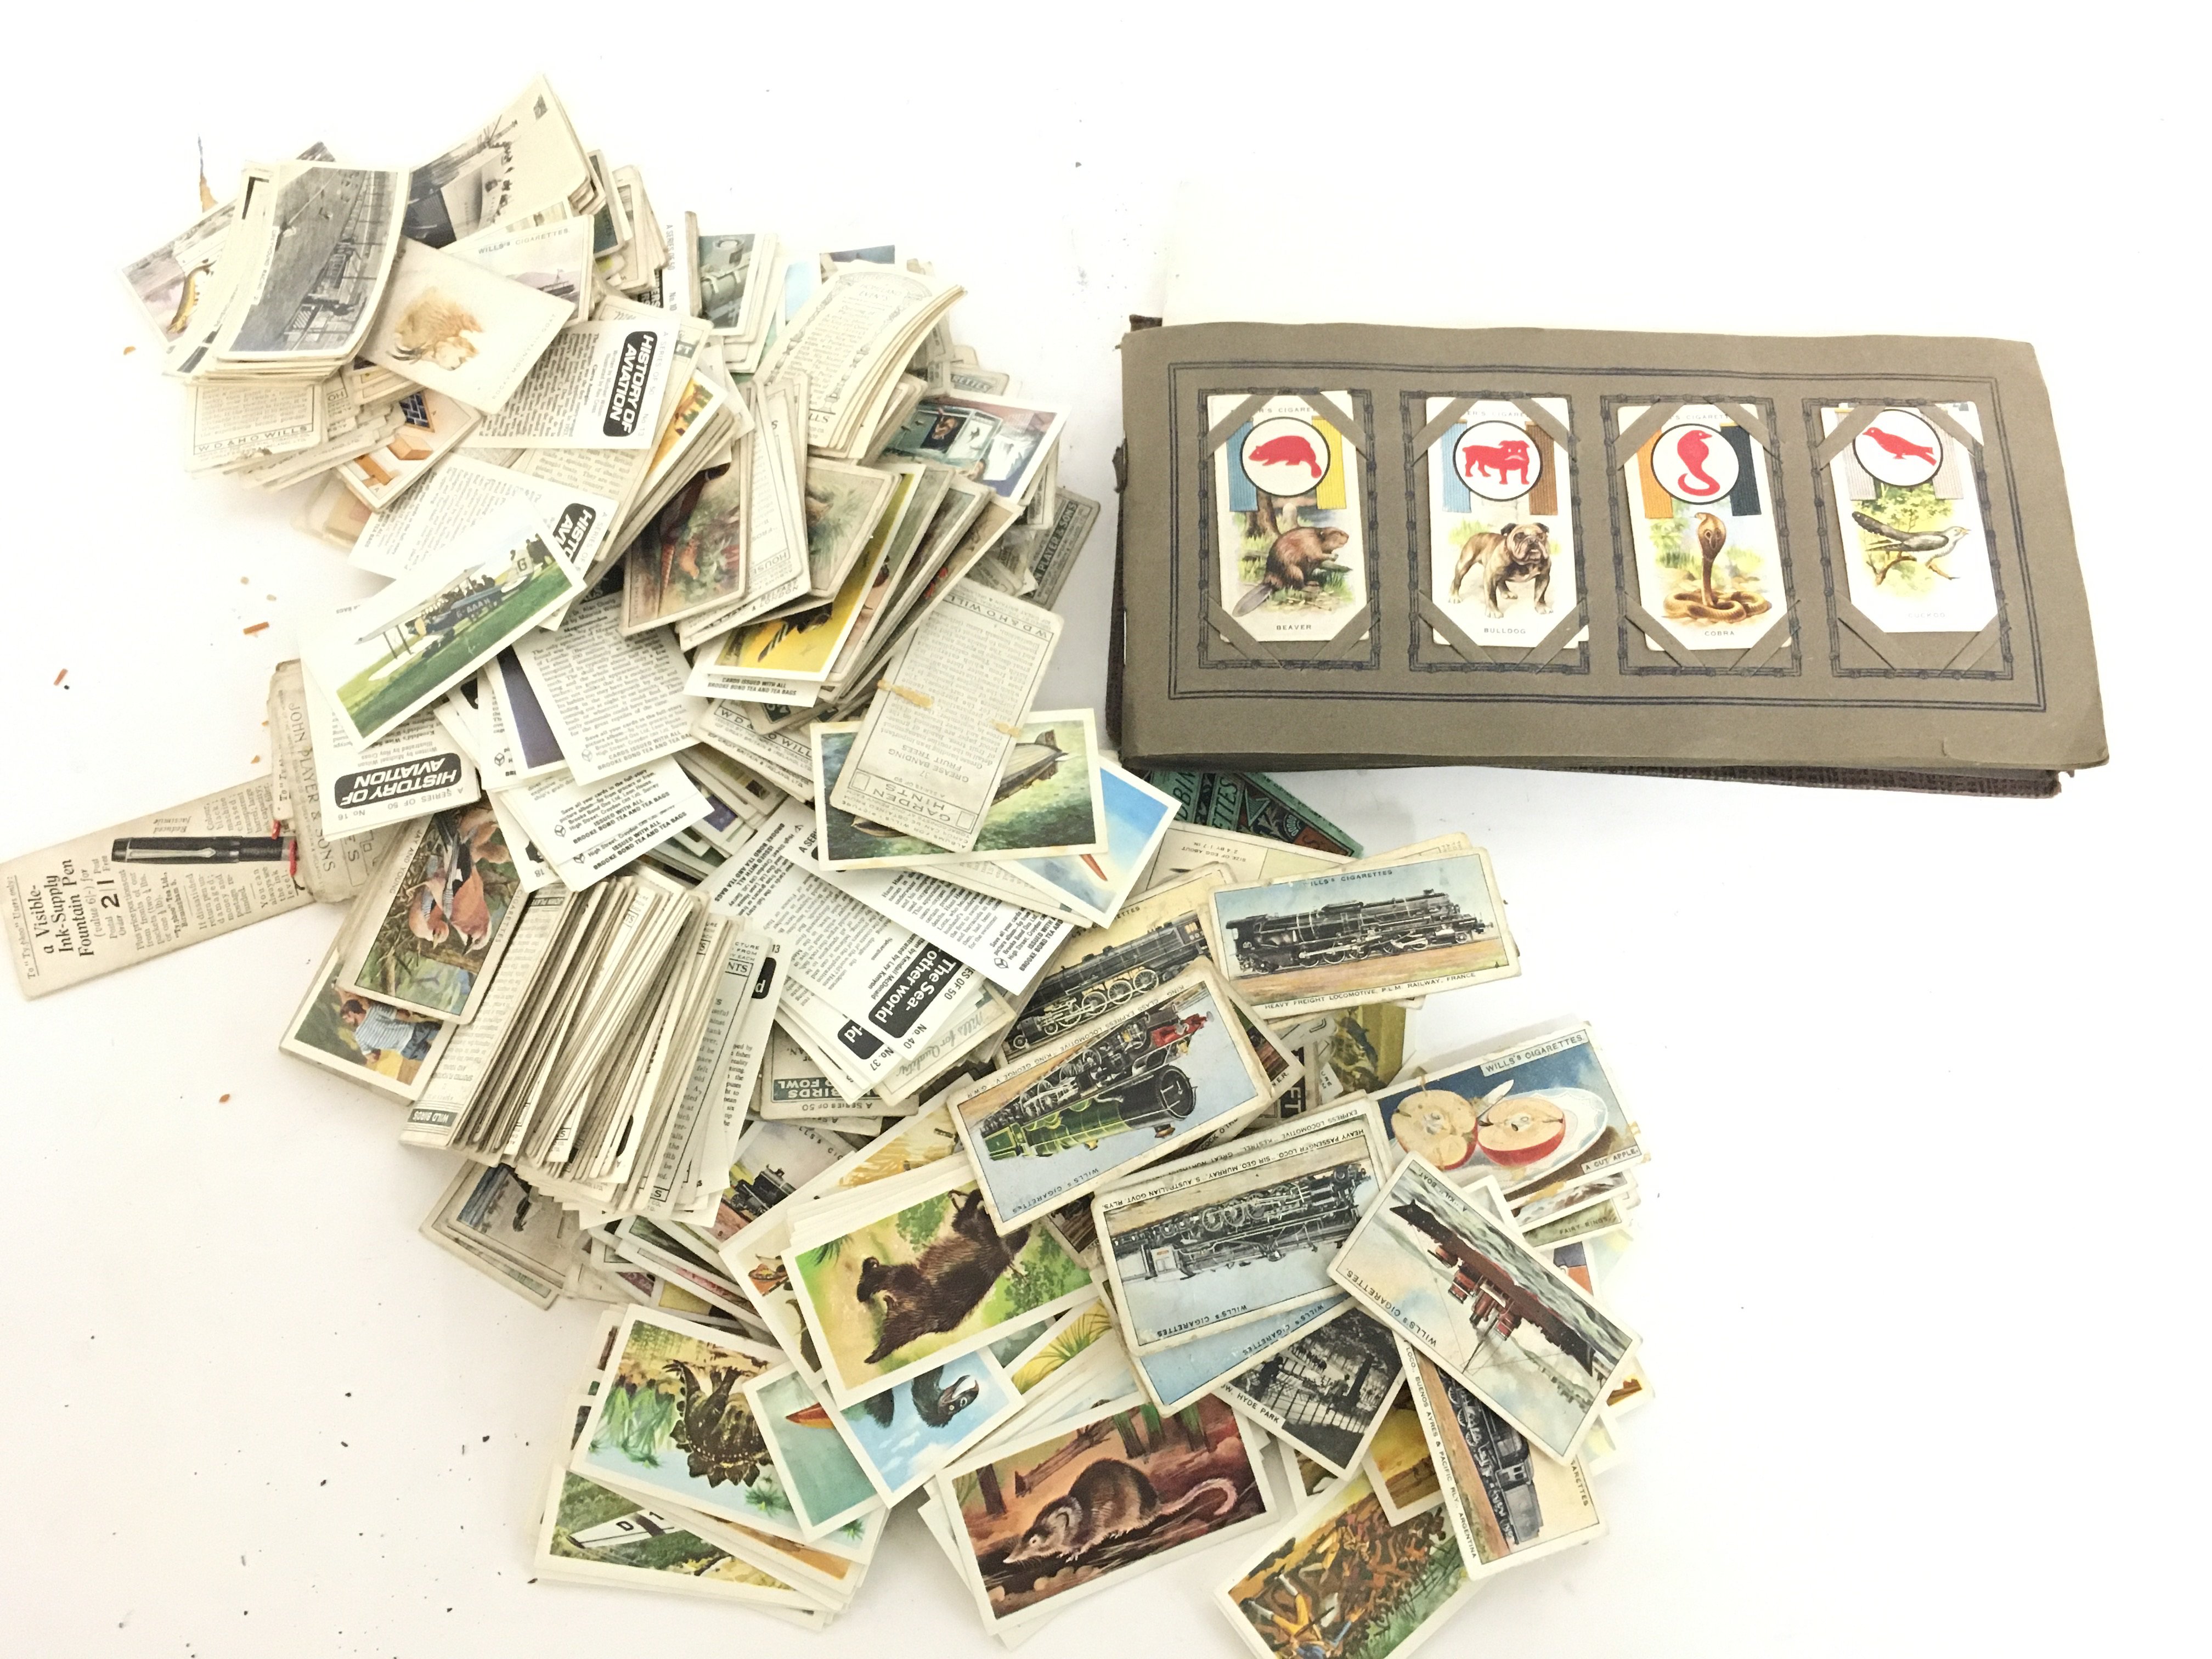 A bag Containing a Collection of Cigarette Cards.